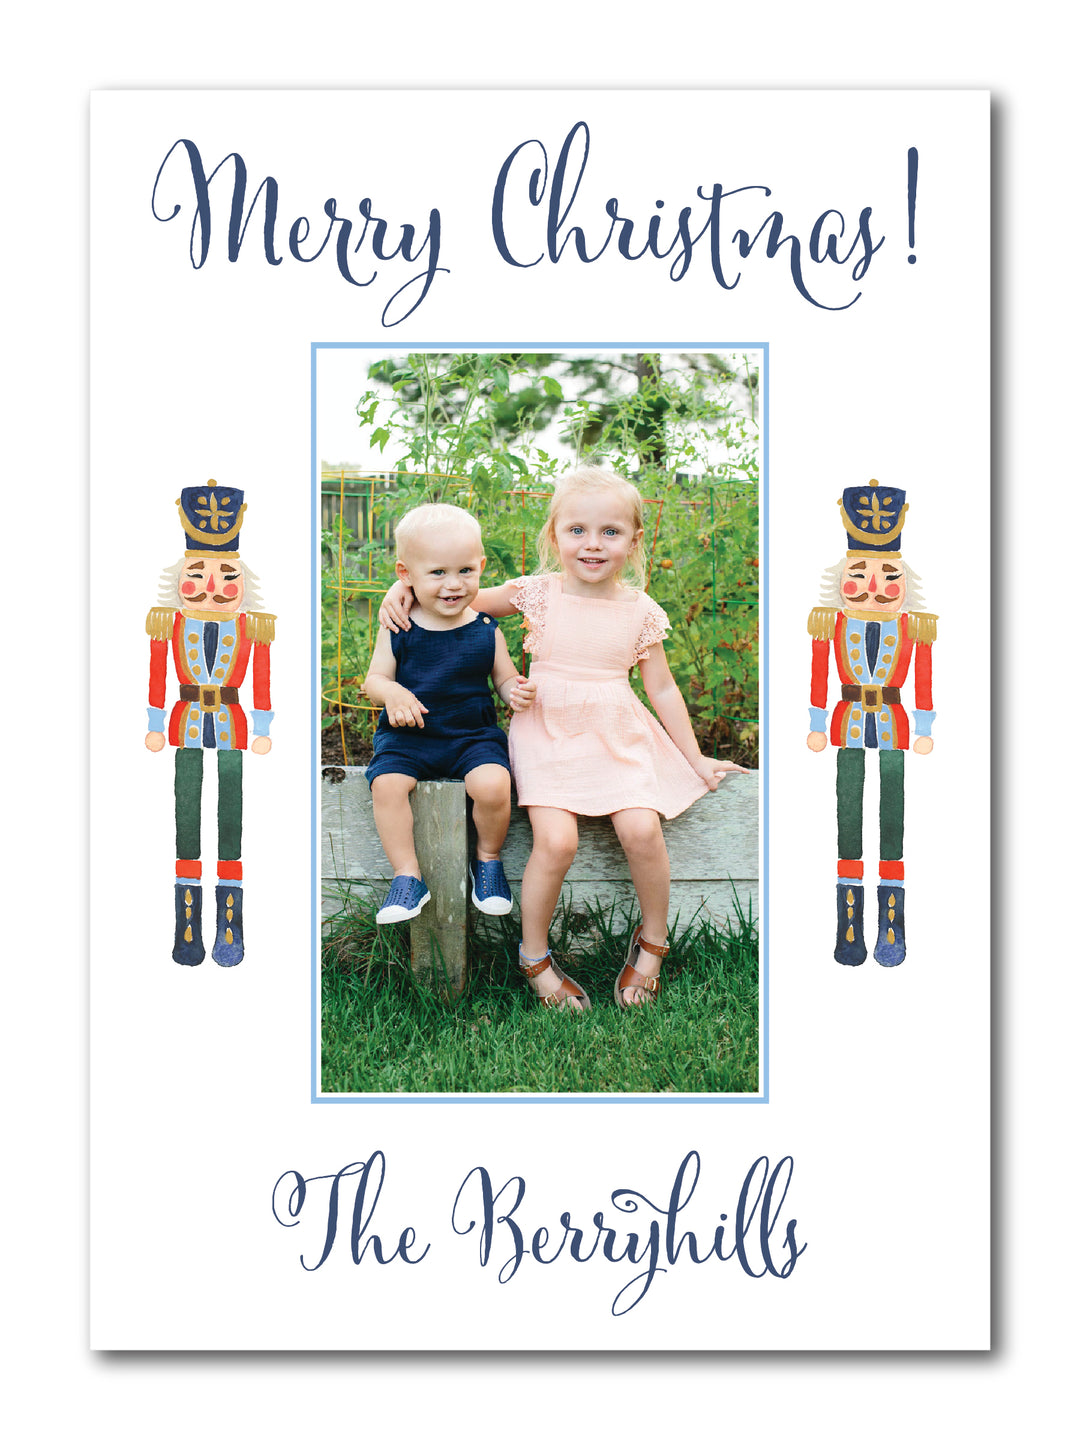 The Berryhill Christmas Card